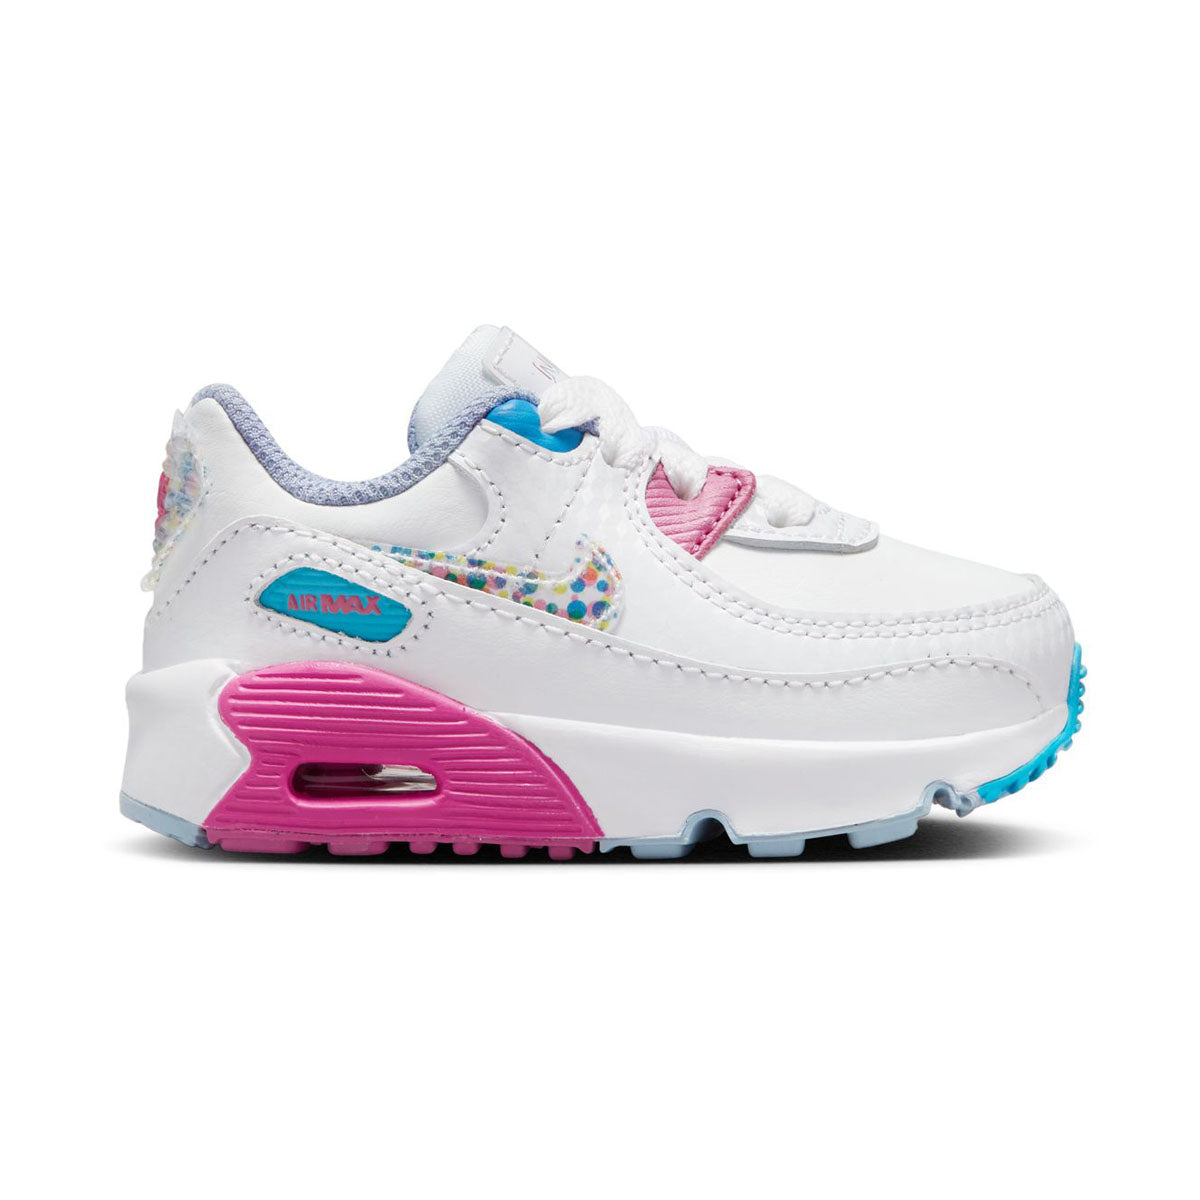 Nike Air Max 90 LTR SE Baby/Toddler Shoes -